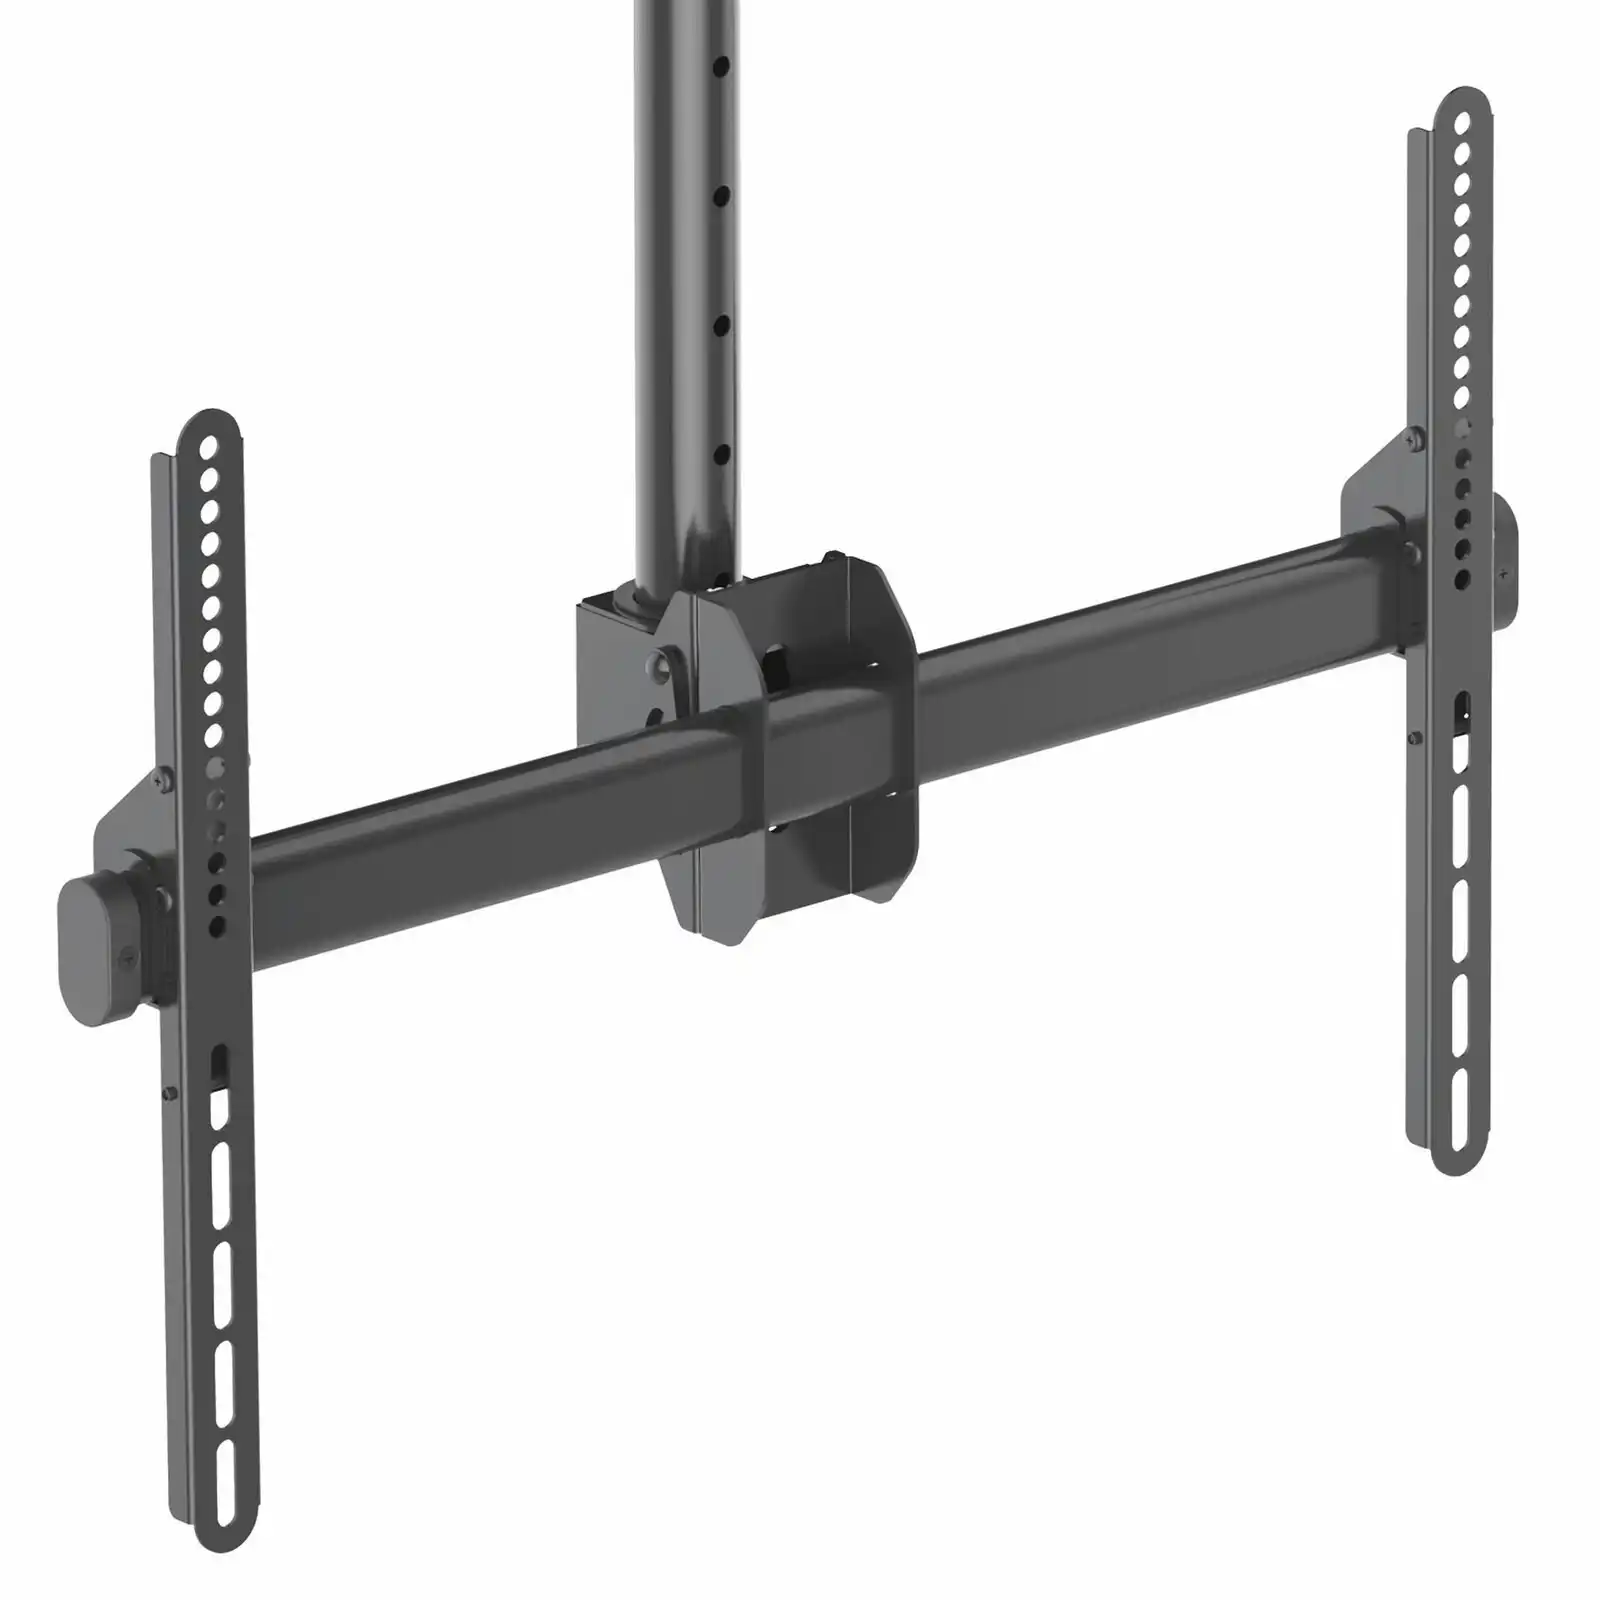 Star Tech Adjustable Pole Full Motion Ceiling TV Mount for 32-75in 50kg Display